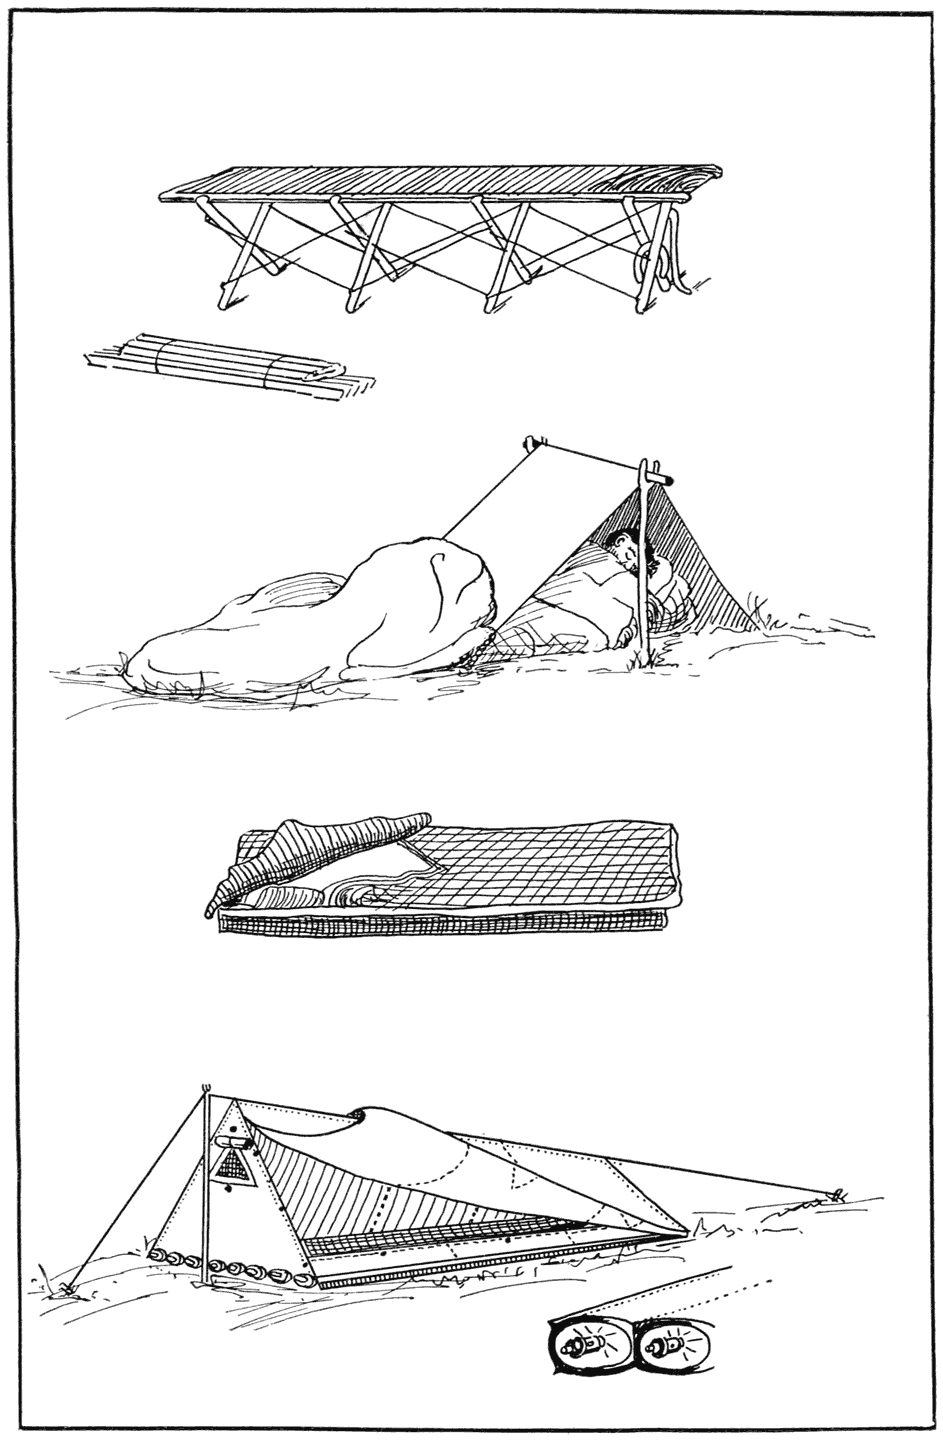 Types of bed equipment. At the top the Yankee cot which folds
into 32 × 4 × 6 inches; beneath it the Kenwood sleeping bag with
tent covering for head. The two lower illustrations have
pneumatic mattress, the upper of the two being the Perfection
sleeping bag and the lower the Airtube camp mattress combined
with a shelter tent.